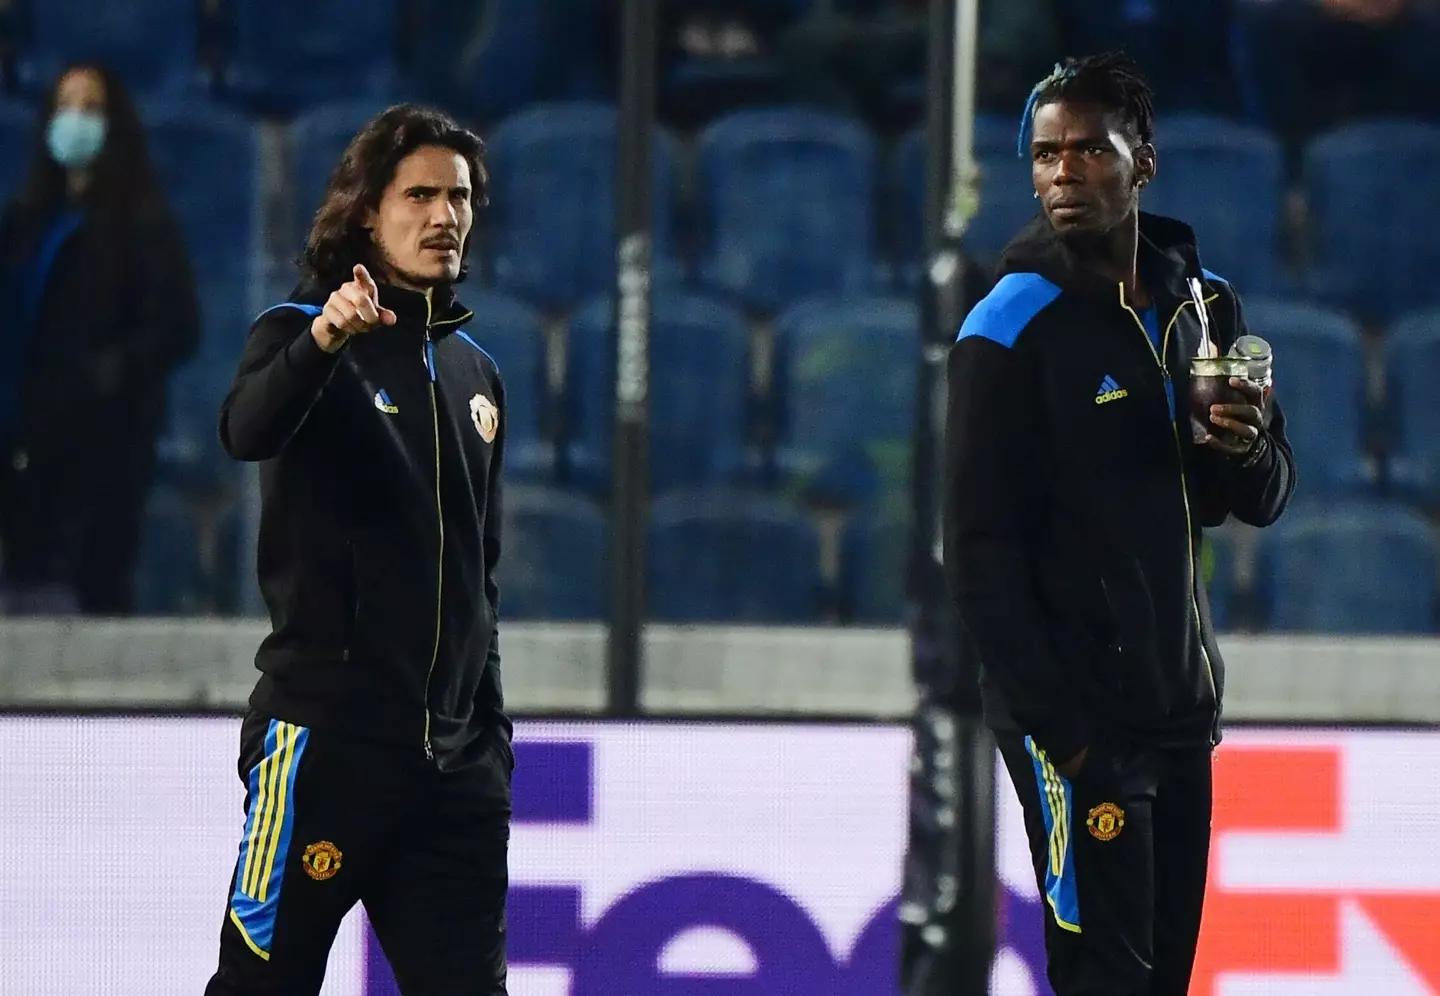 Cavani and Pogba will leave this summer, after both having a season beset by injuries. Image: PA Images